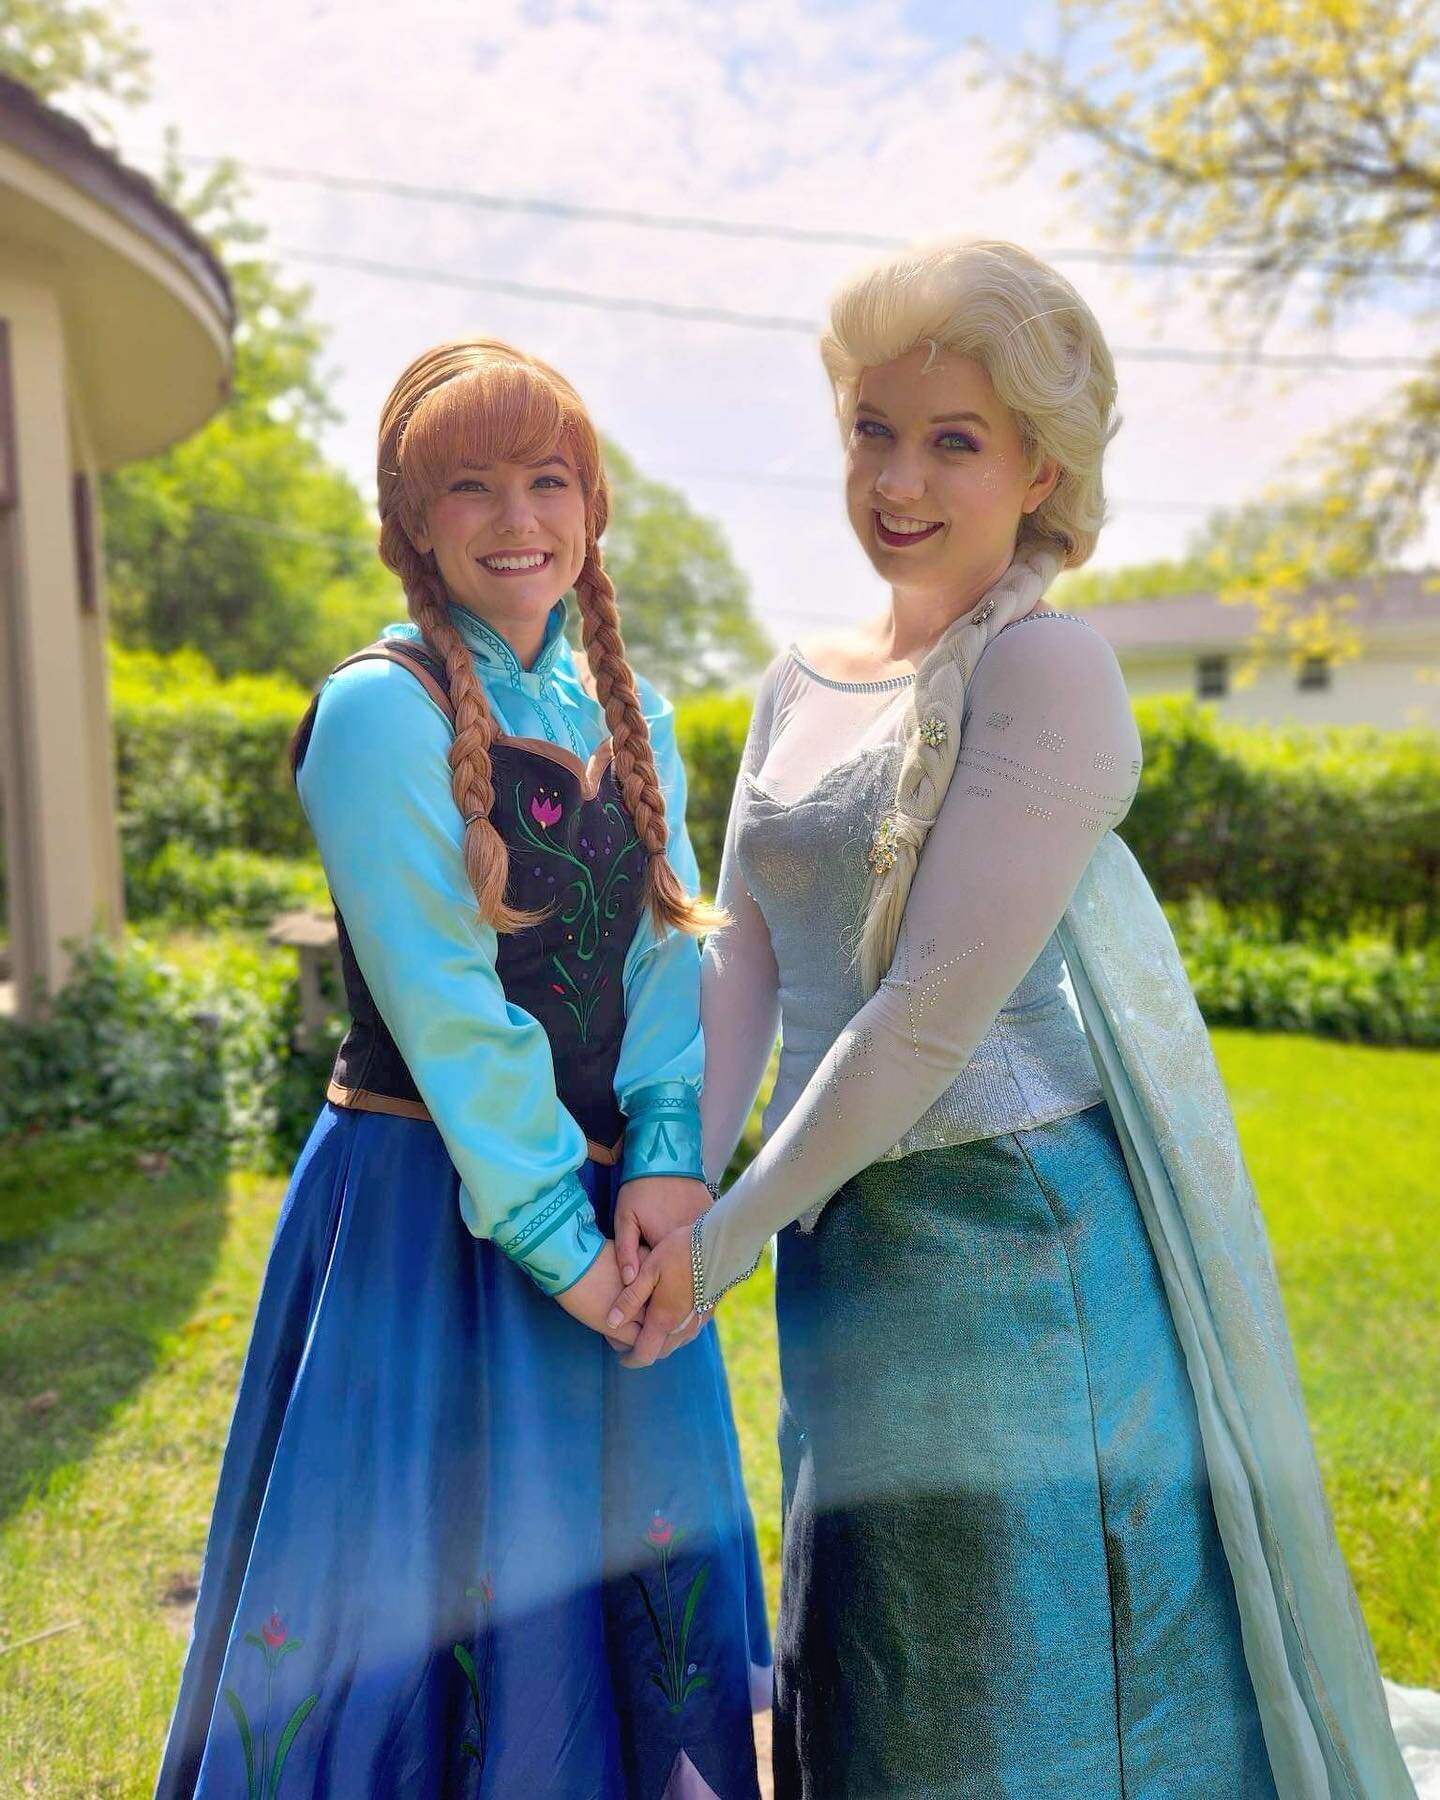 A bridge has two sides. Mother had two daughters. We did this together💖
.
Happy Mother&rsquo;s Day!💐
.
.
.

#frozen #frozen2 #frozenparty #frozenfever #frozencosplay #frozendisney #frozenanna #frozenelsa #queenanna #queenelsa #elgin #elsa #southelg